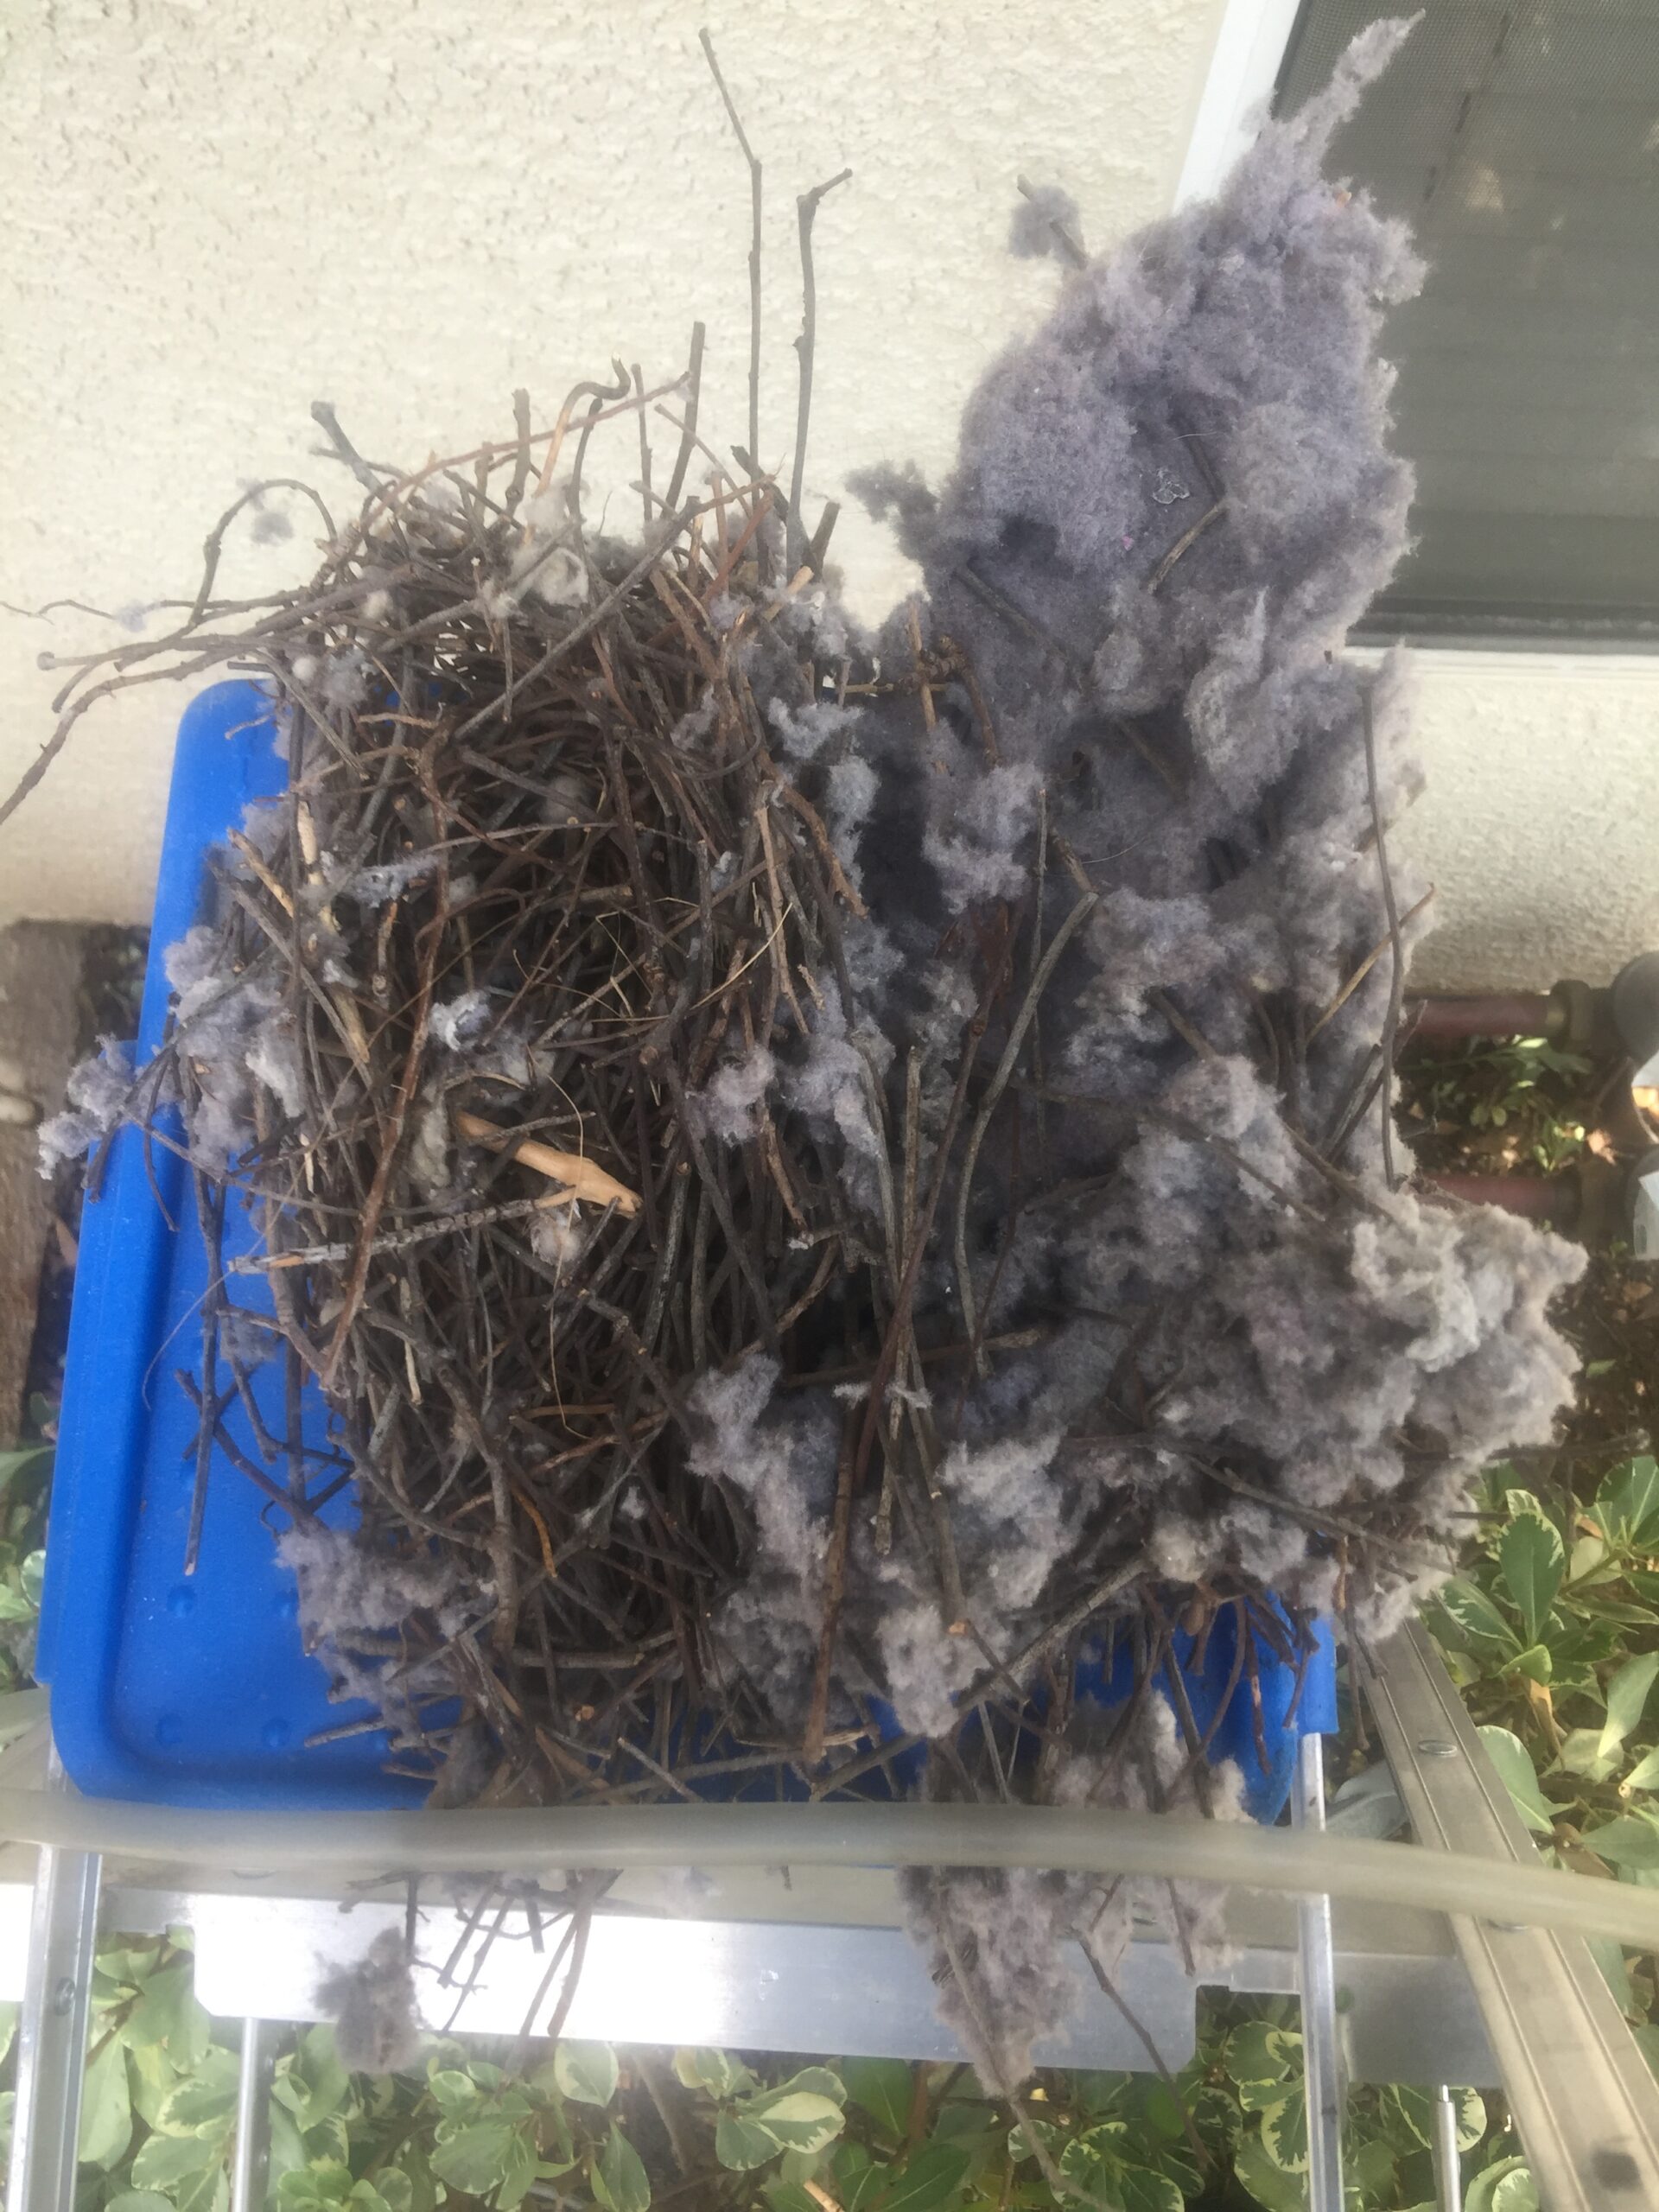 Bird Nest removed from Dryer Vent Tube by A-1 Duct Cleaning & Chimney Sweep in Orange County, CA